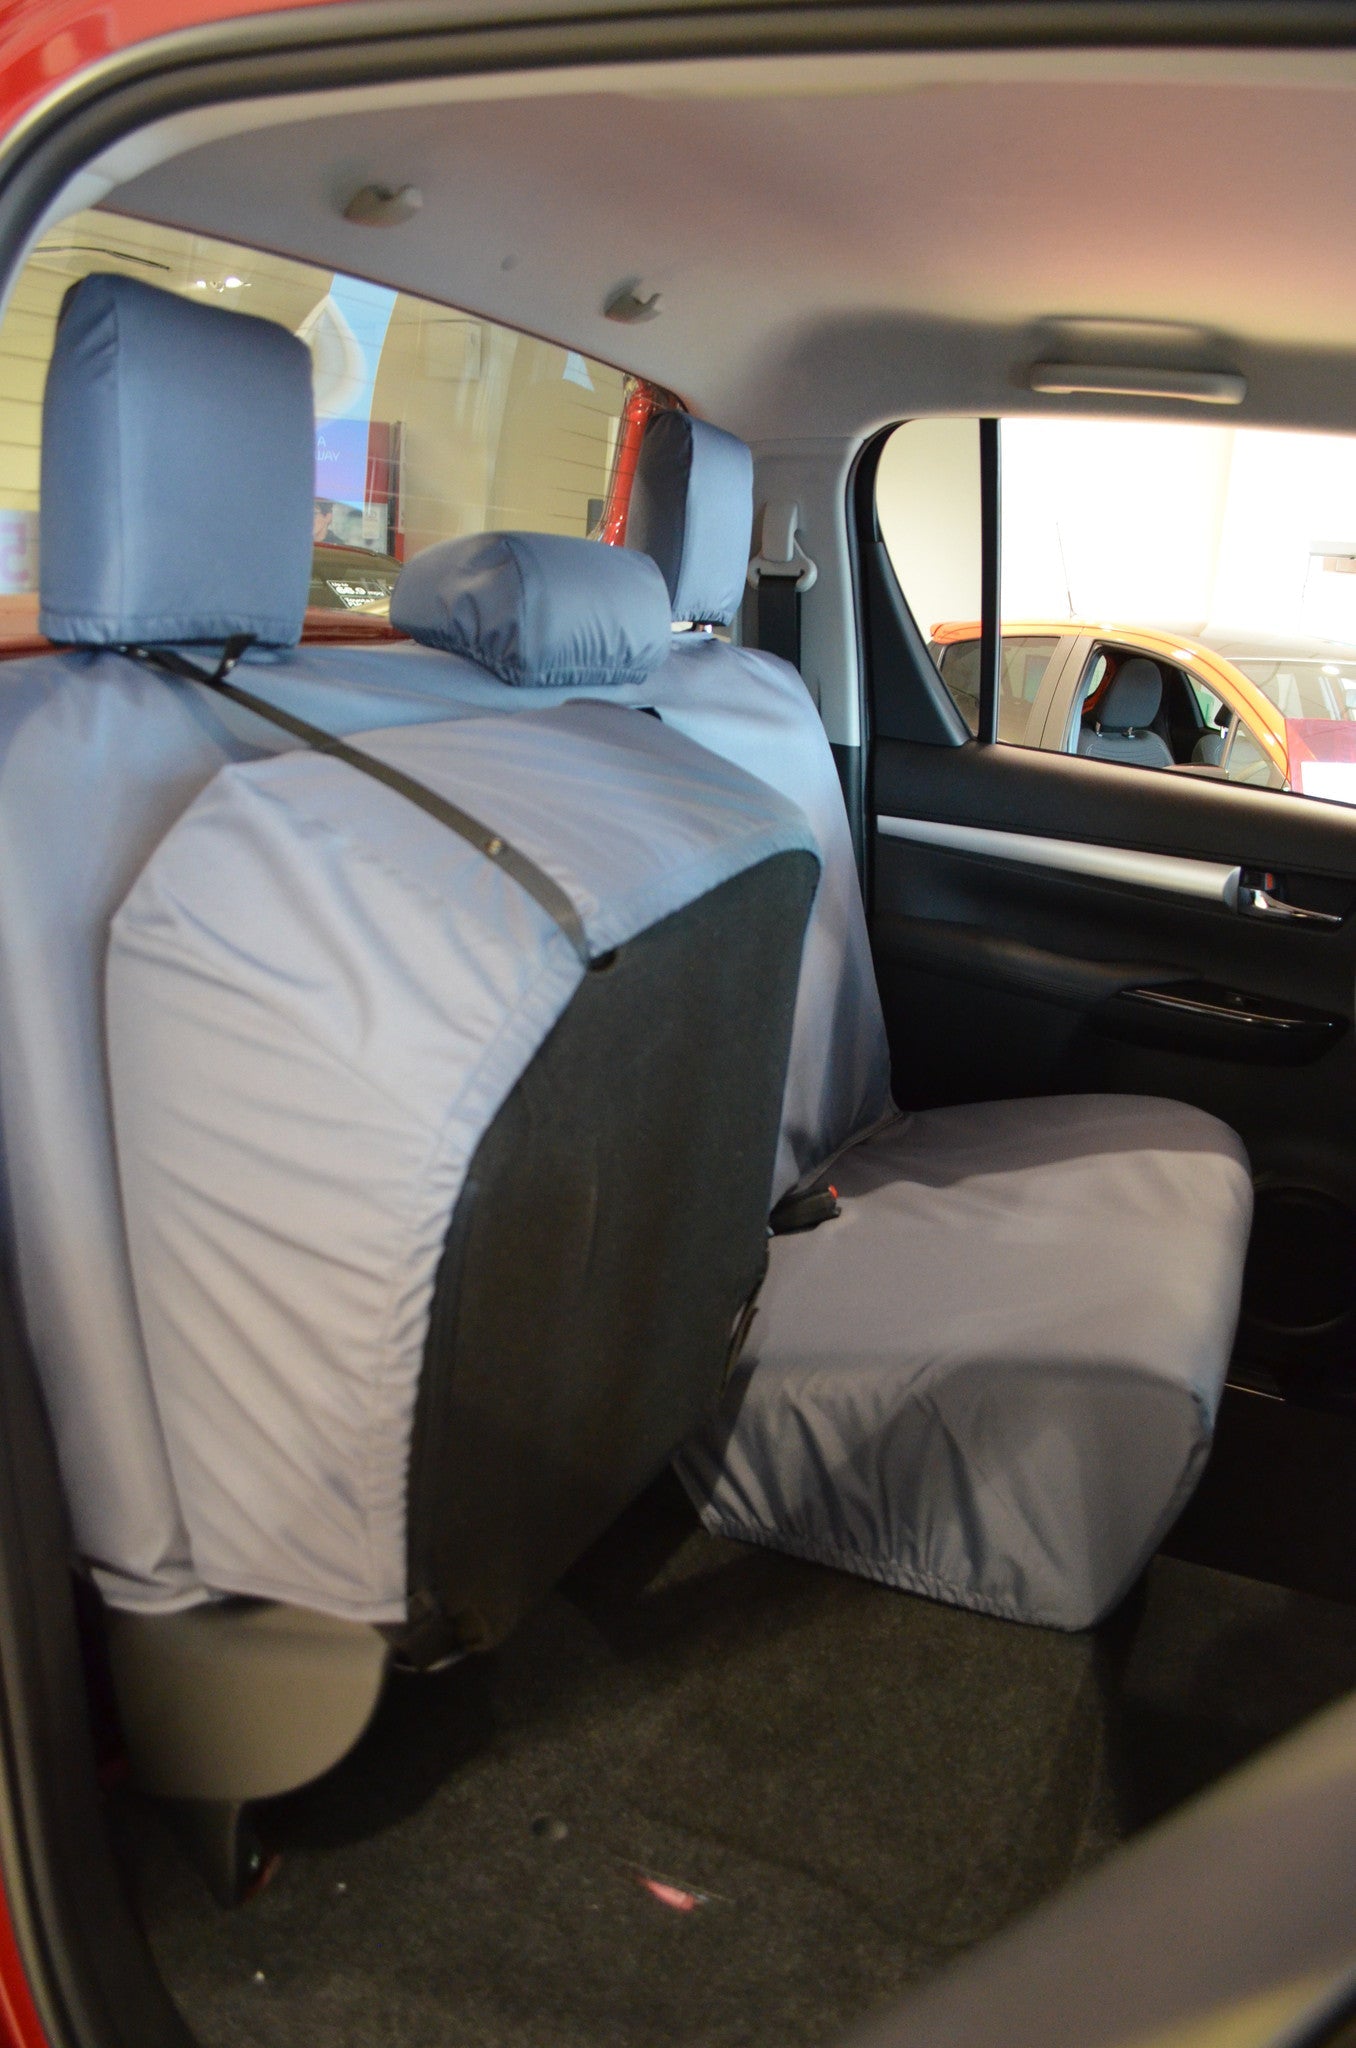 Toyota Hilux Invincible 2016+ Tailored Seat Covers  Turtle Covers Ltd